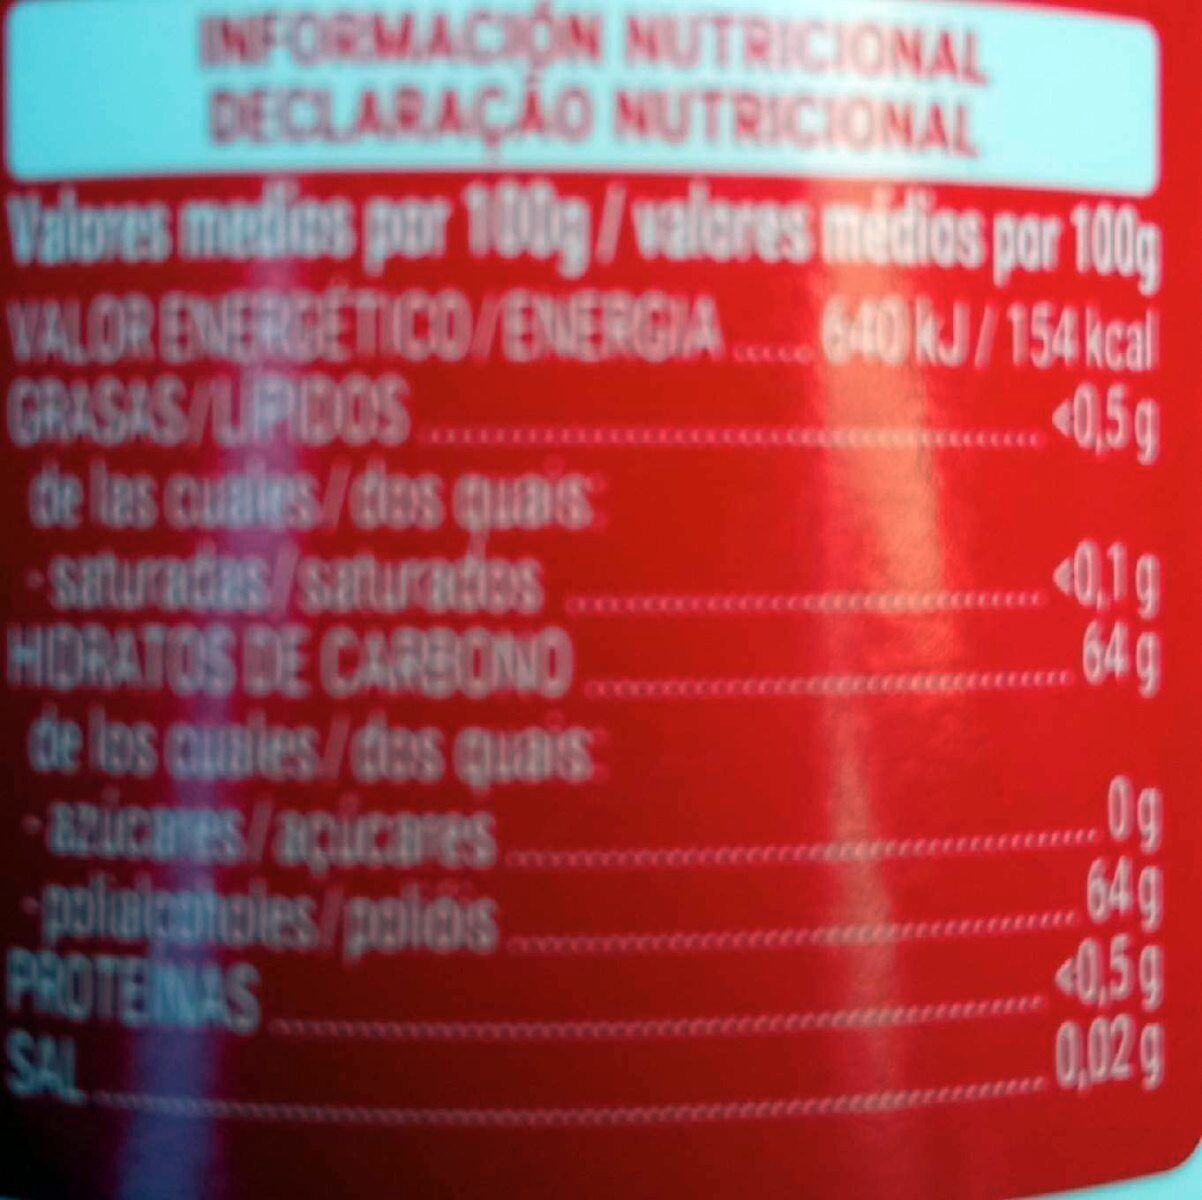 Chickles fresa - Nutrition facts - es